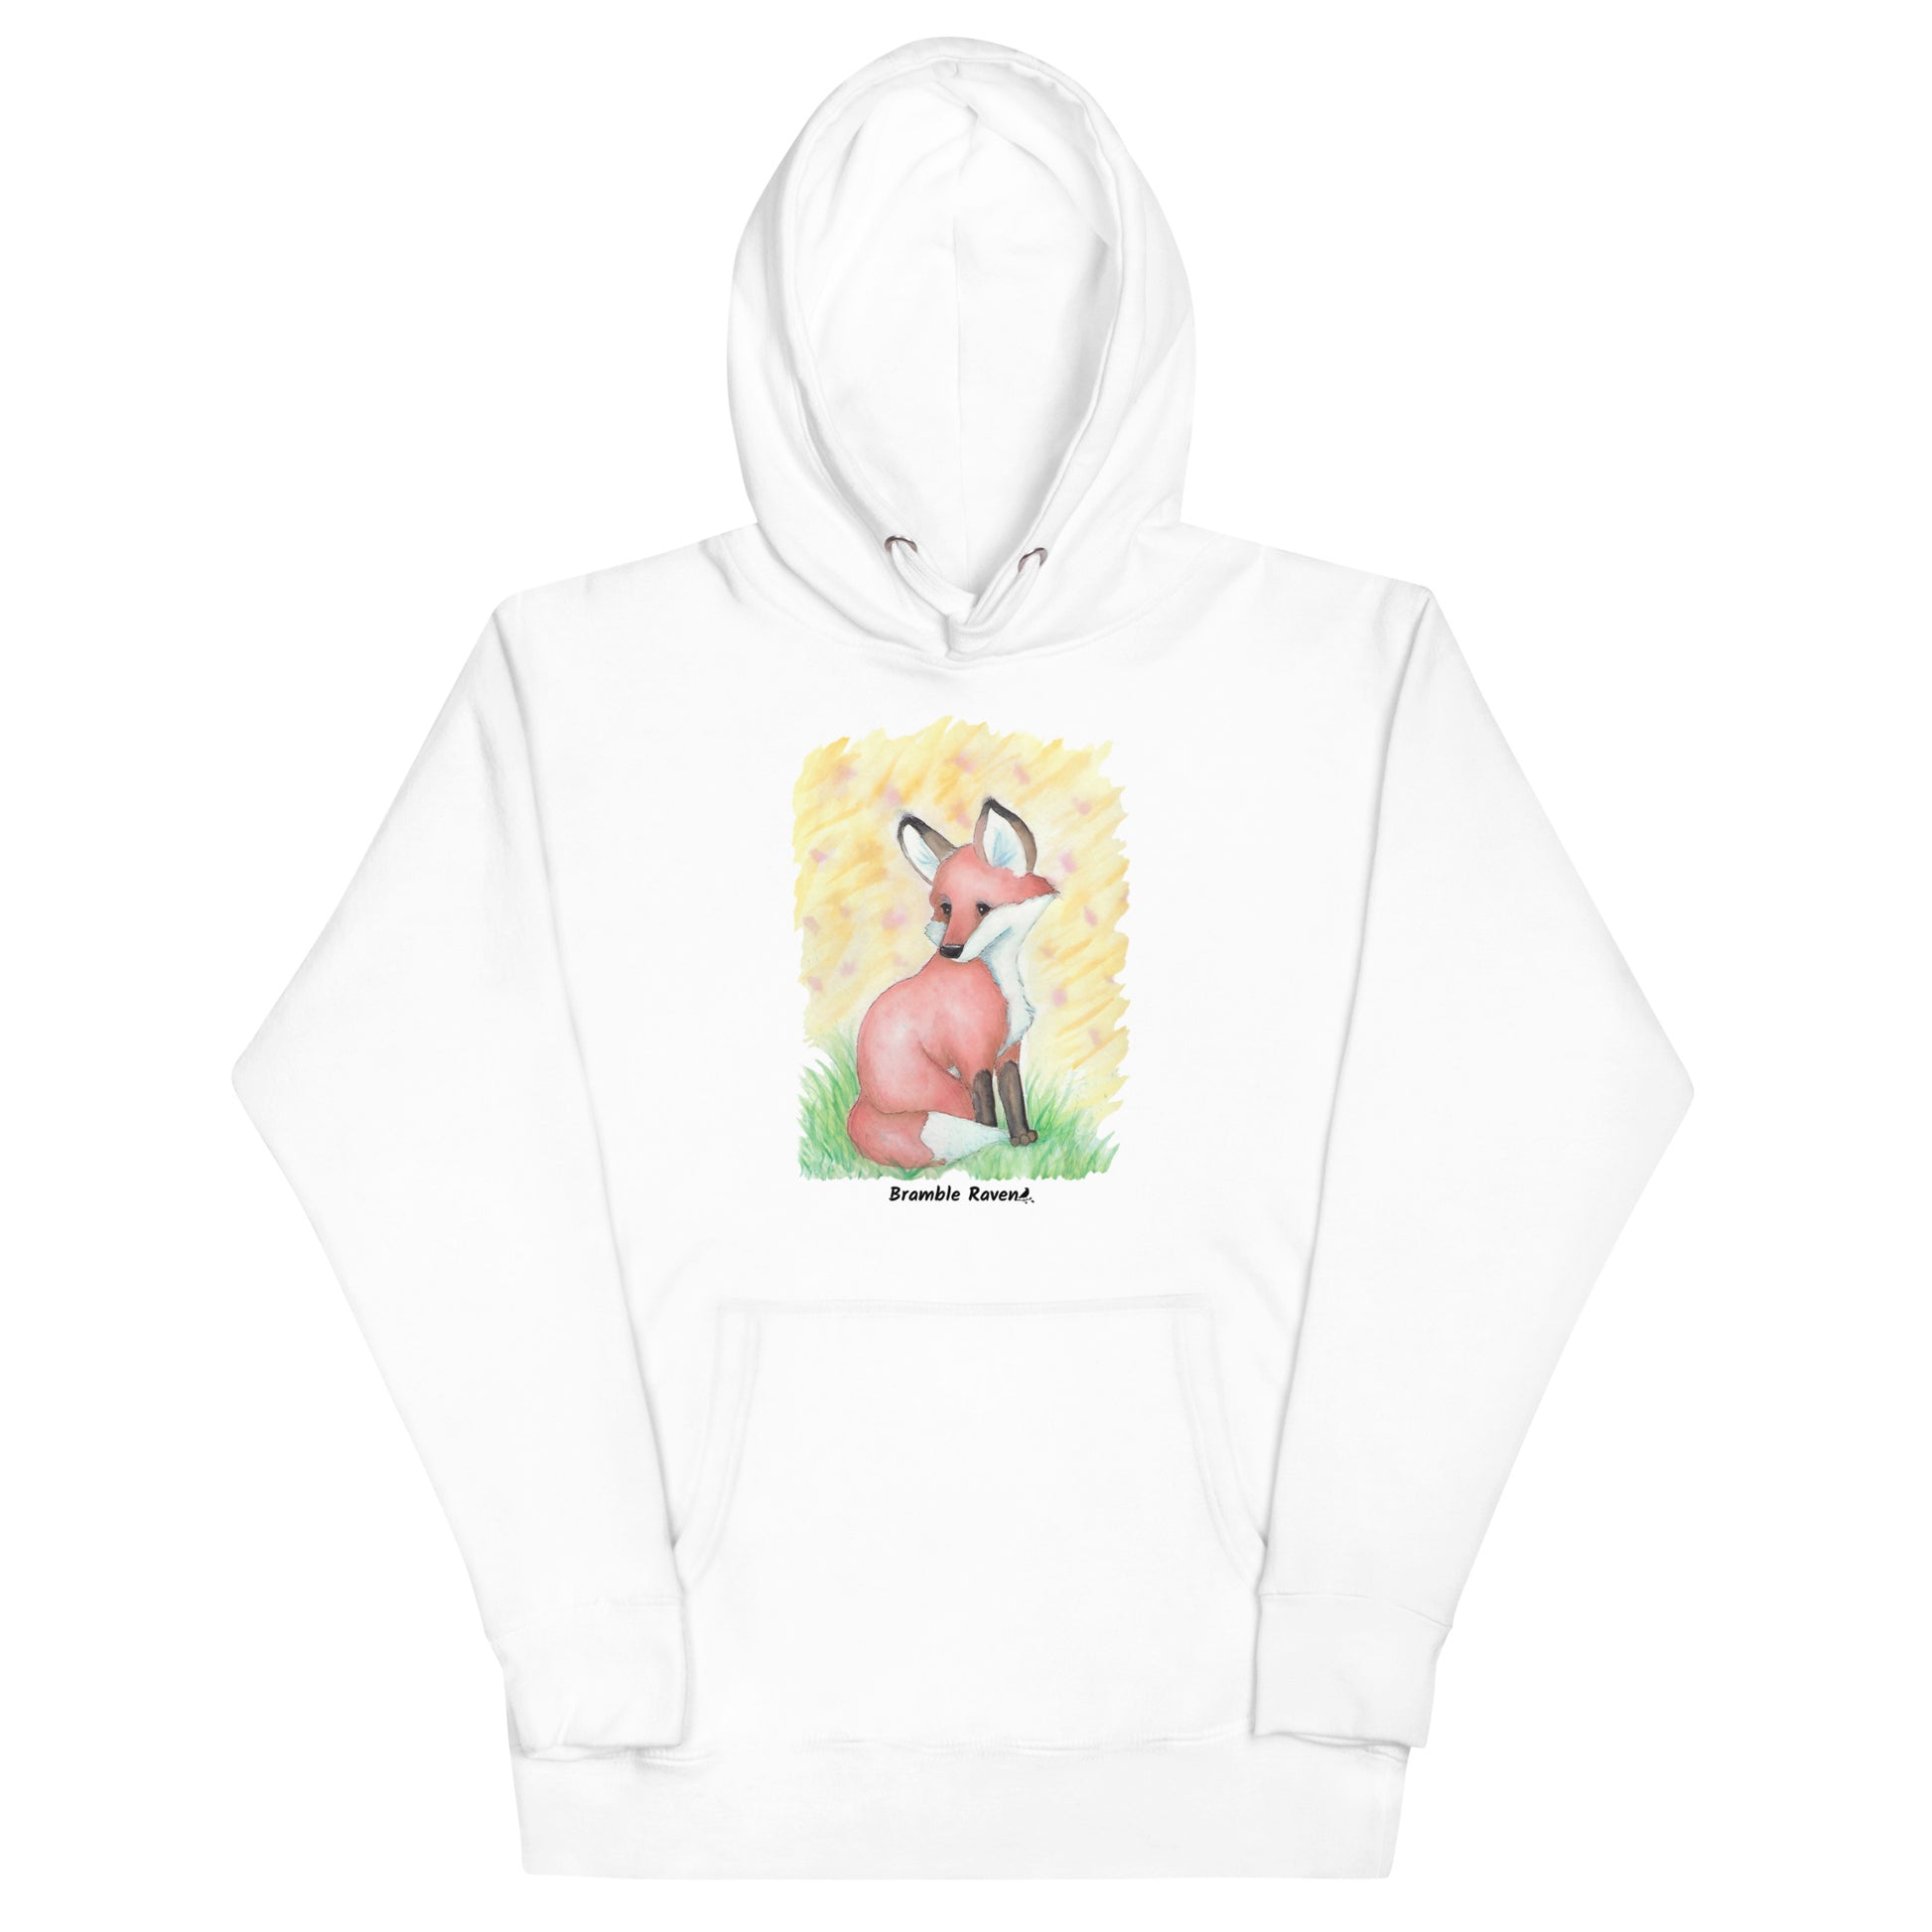 Unisex white colored hoodie. Features original watercolor painting of a fox in the grass against a yellow backdrop.